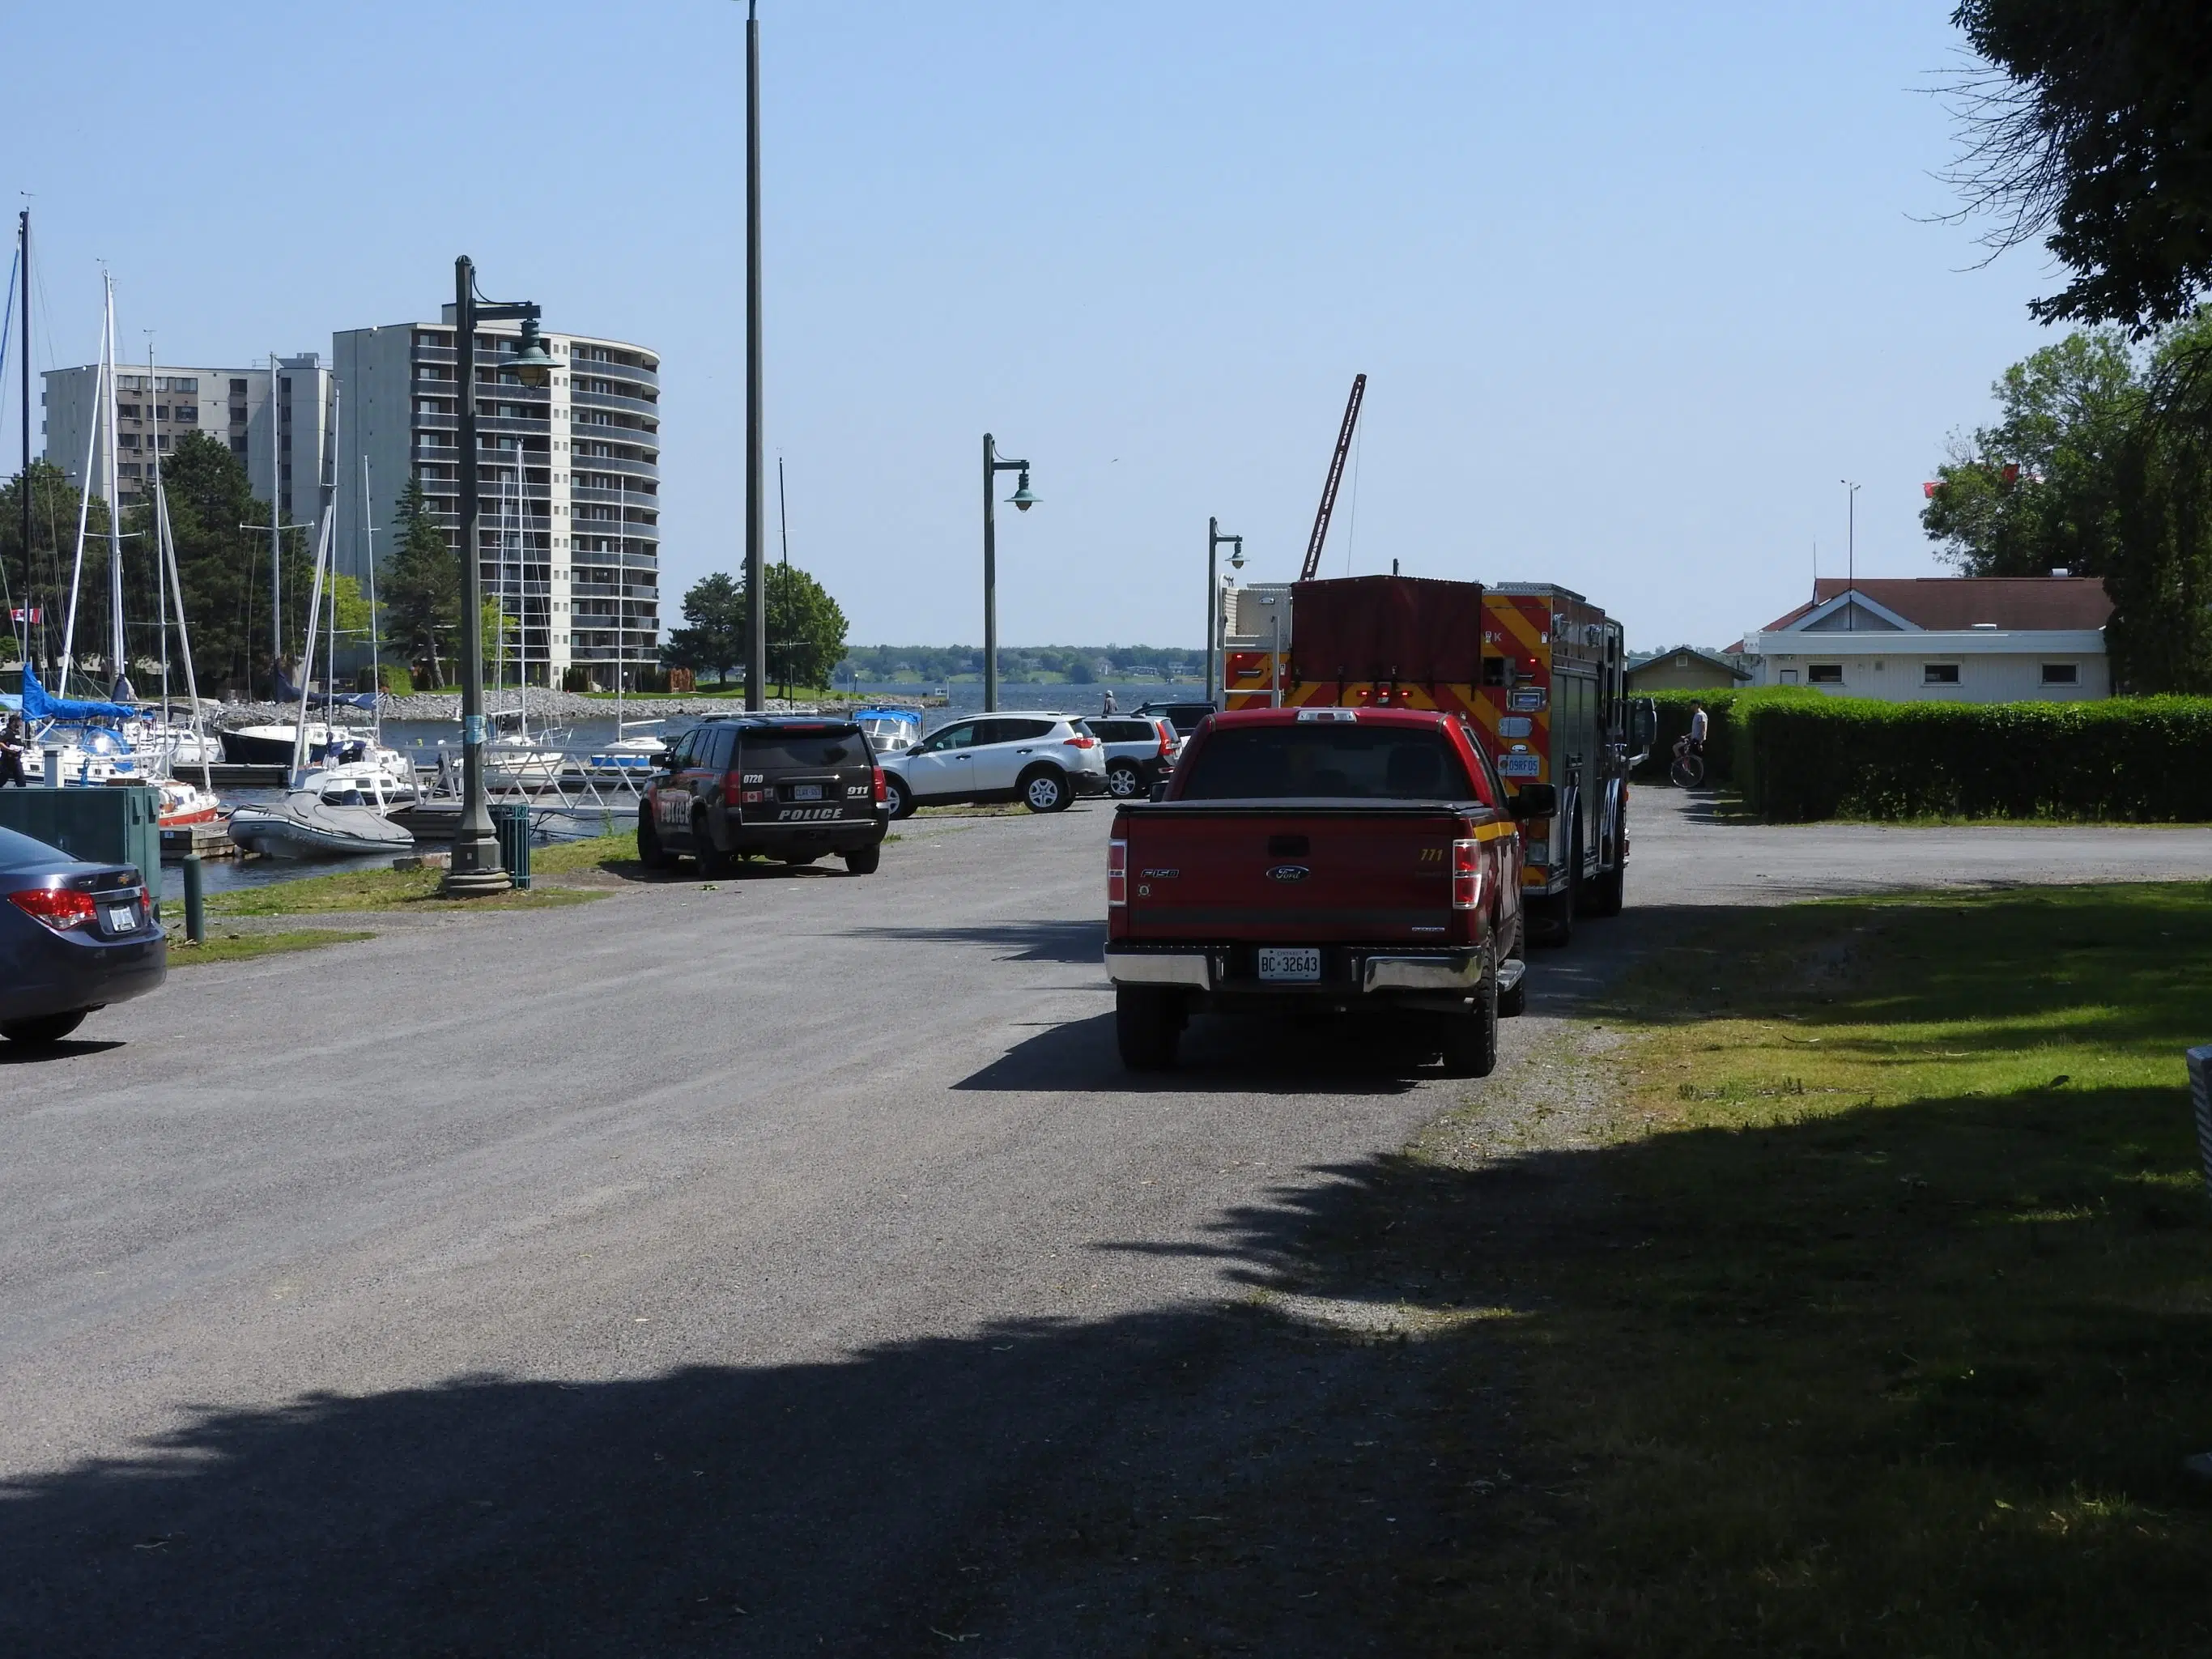 Body pulled from water near Victoria Park